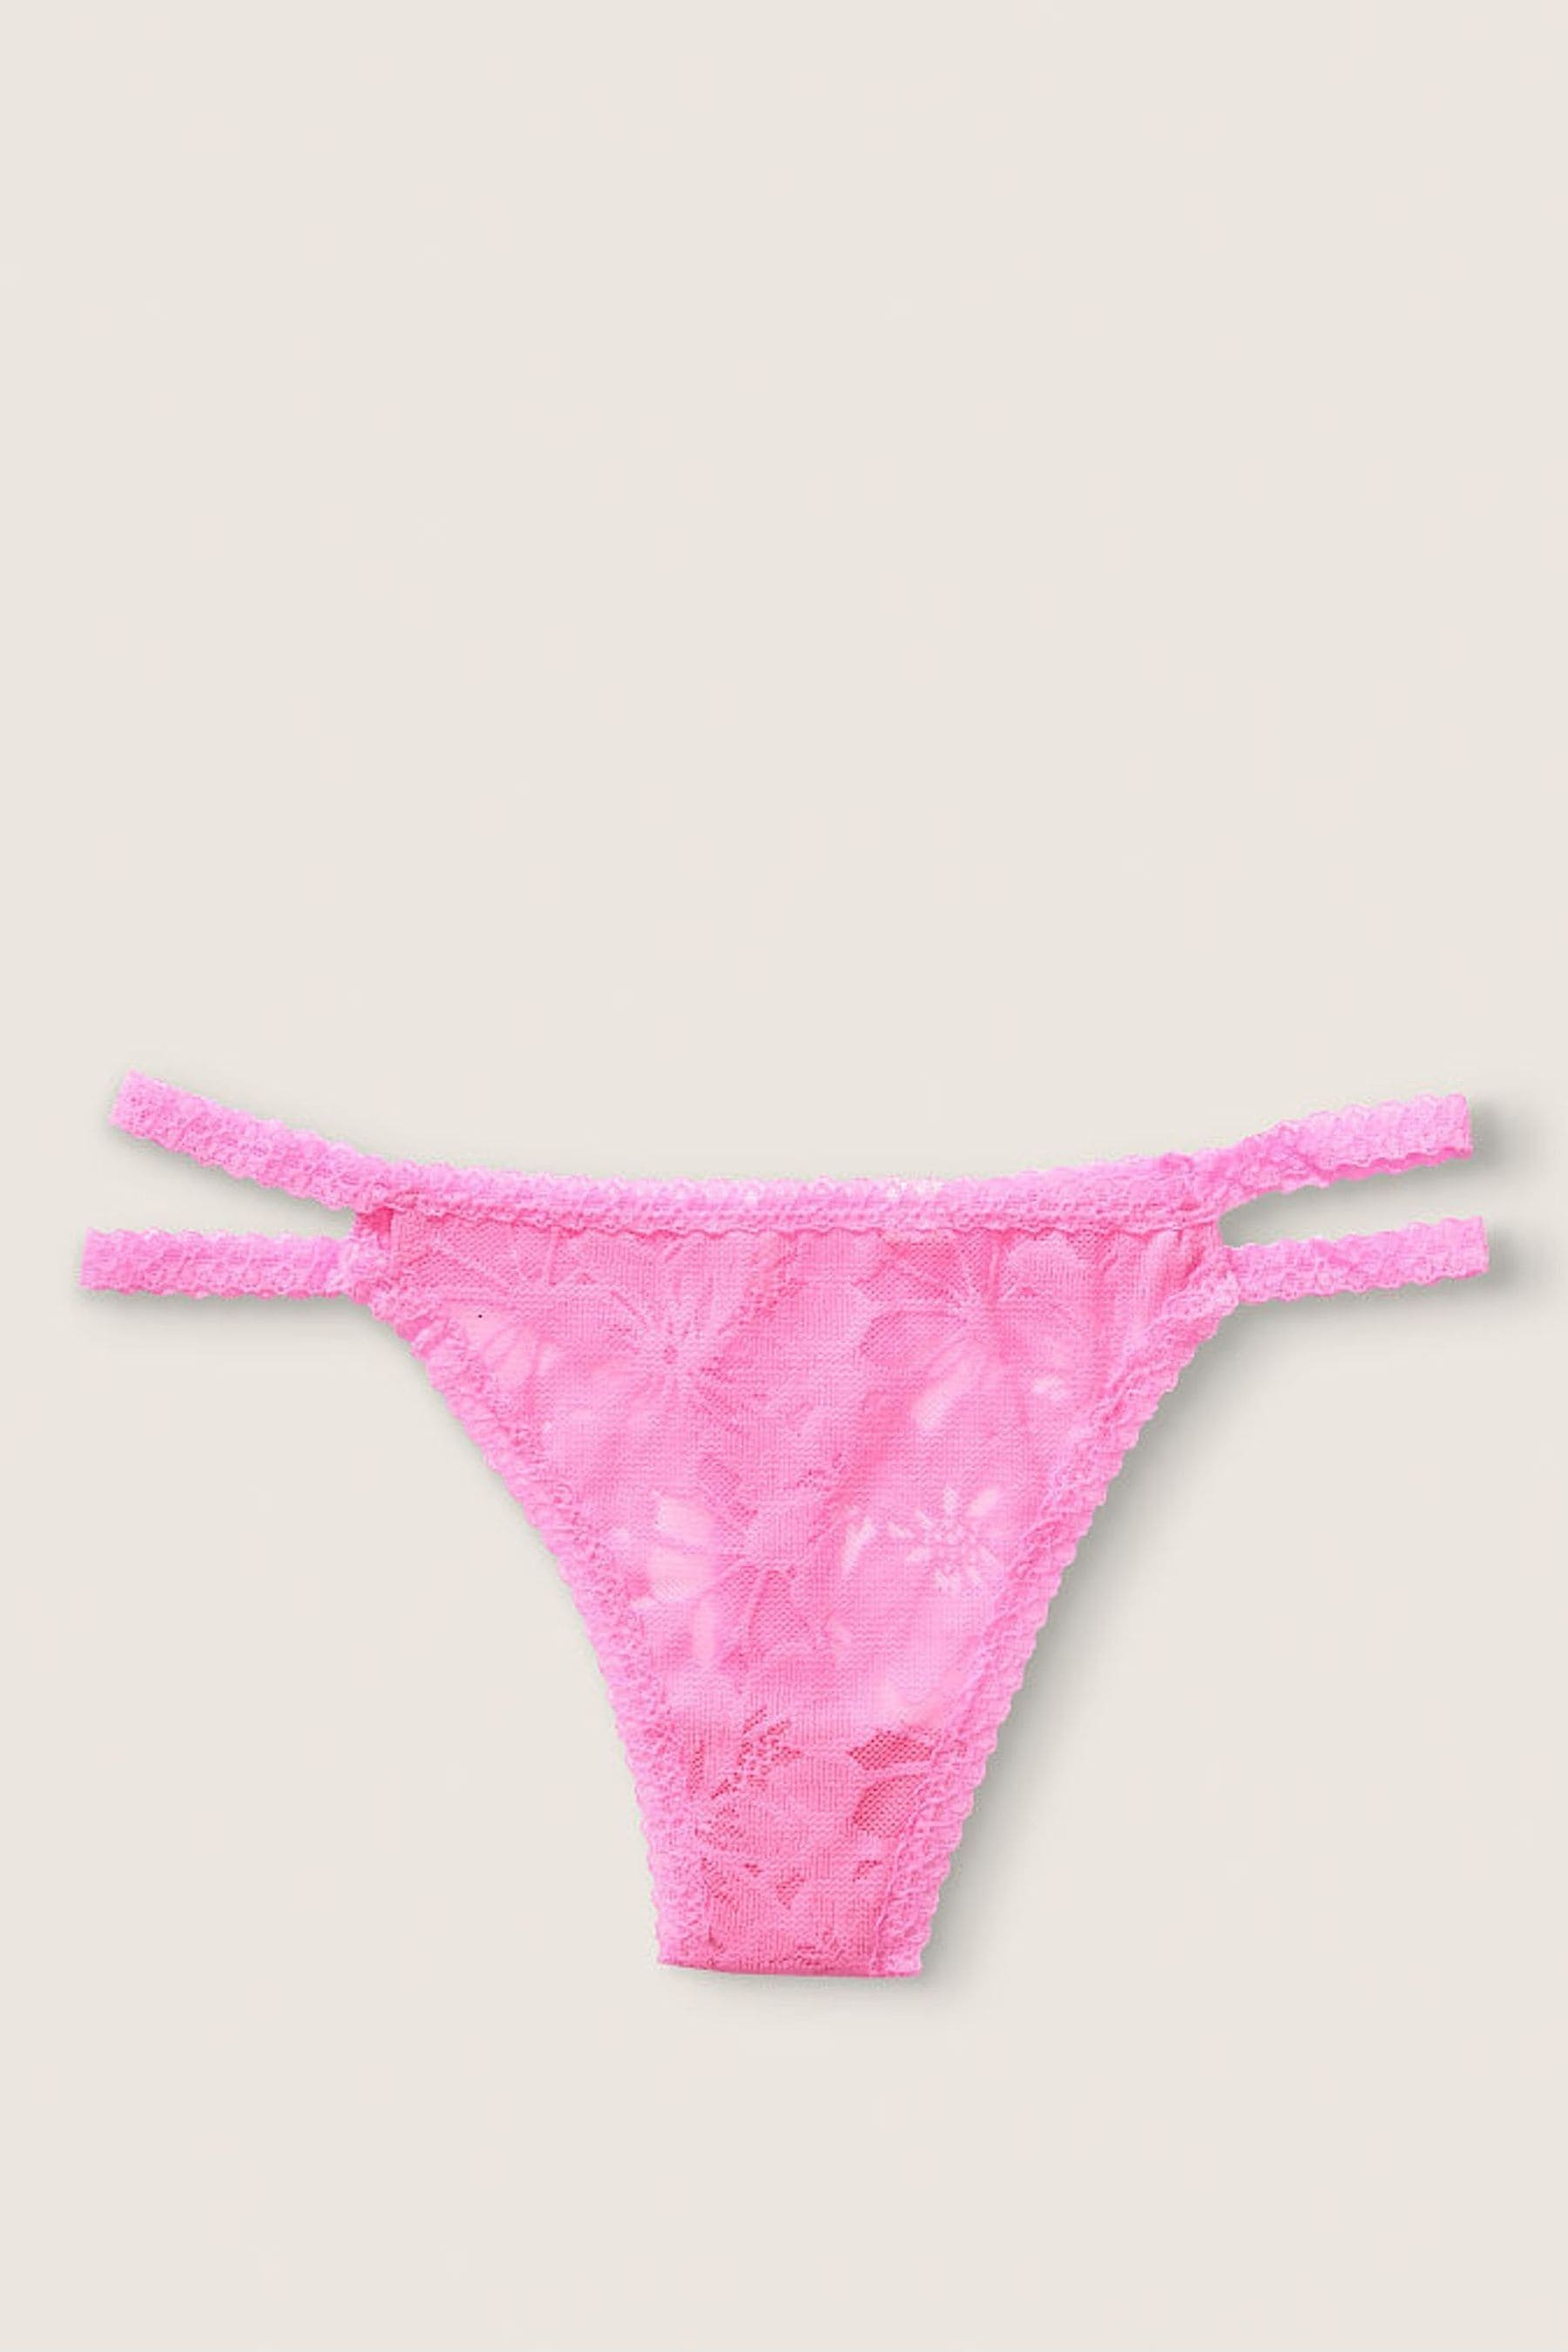 Buy Victoria's Secret PINK Lace Strappy Thong from the Victoria's ...